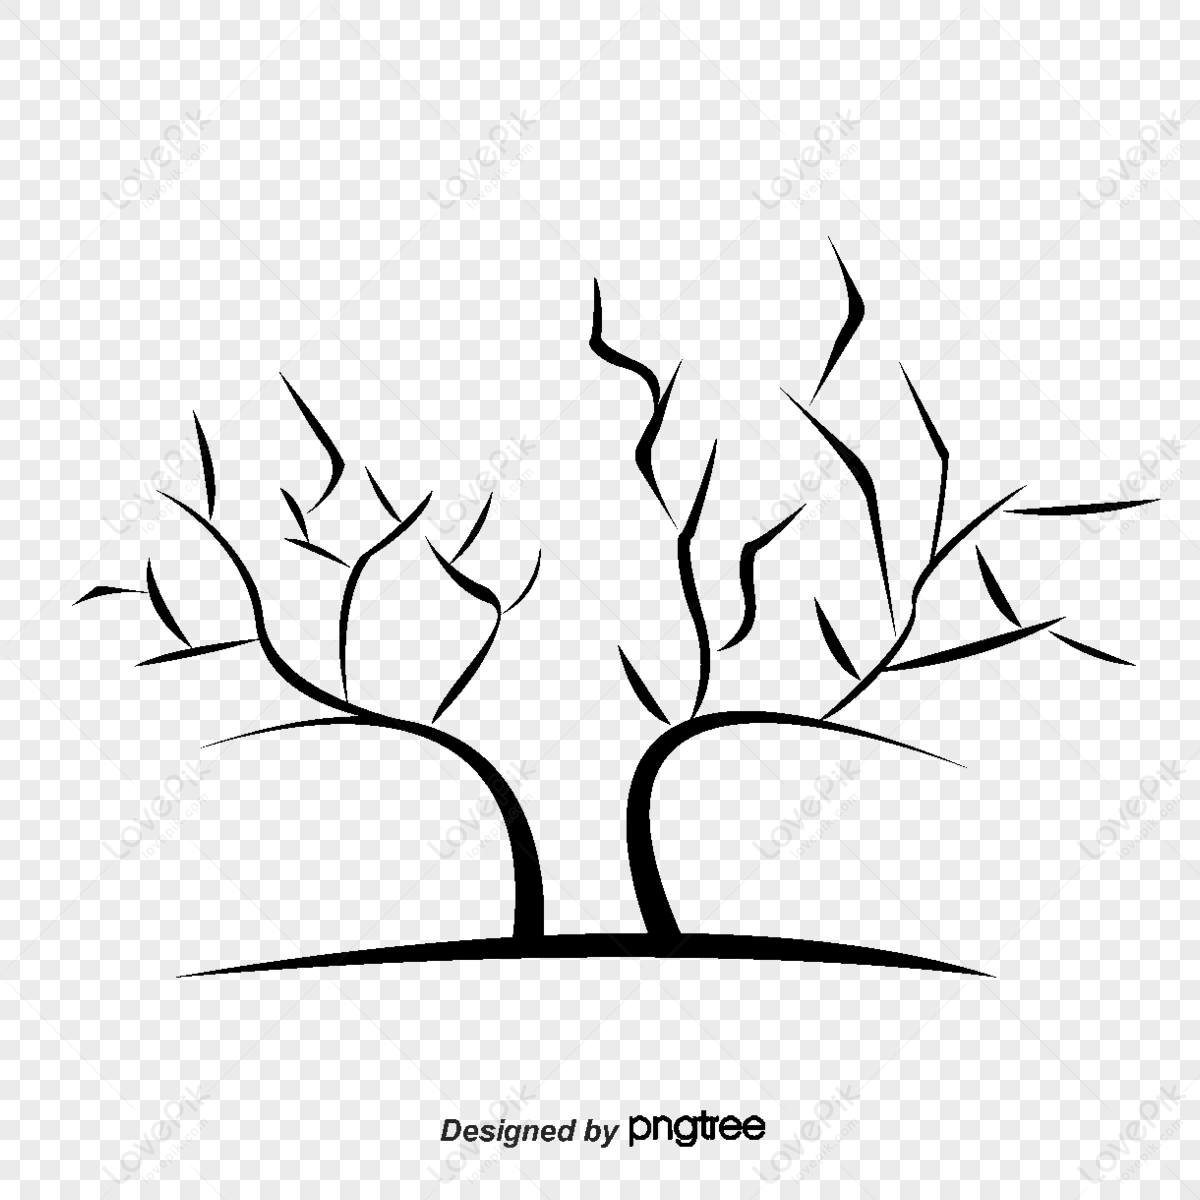 Pencil Sketch Tree Without Leaves Stock Illustration 1123302191 |  Shutterstock